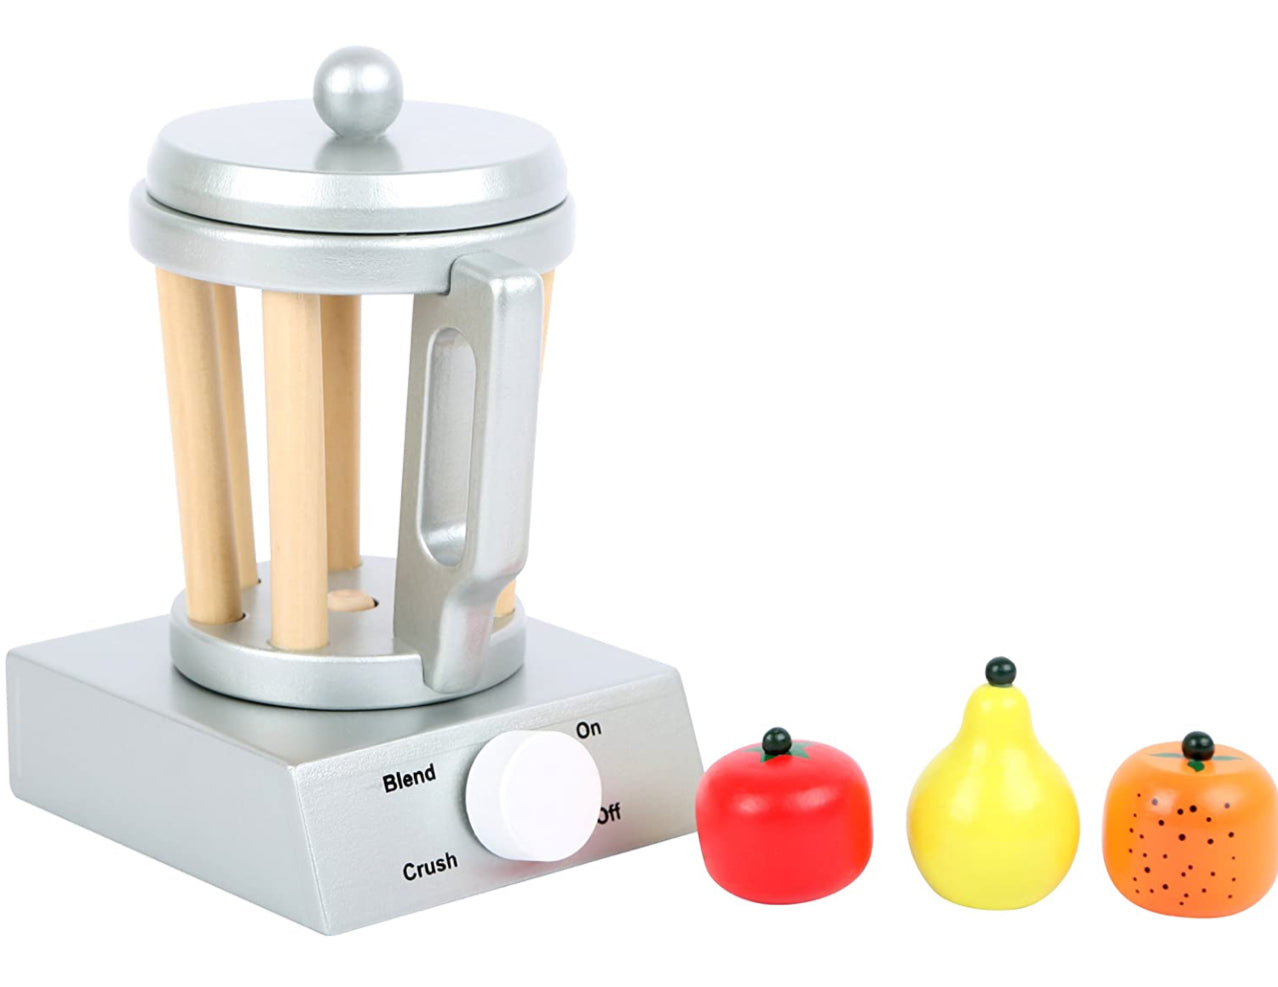 Wooden Toy Blender - Small Foot